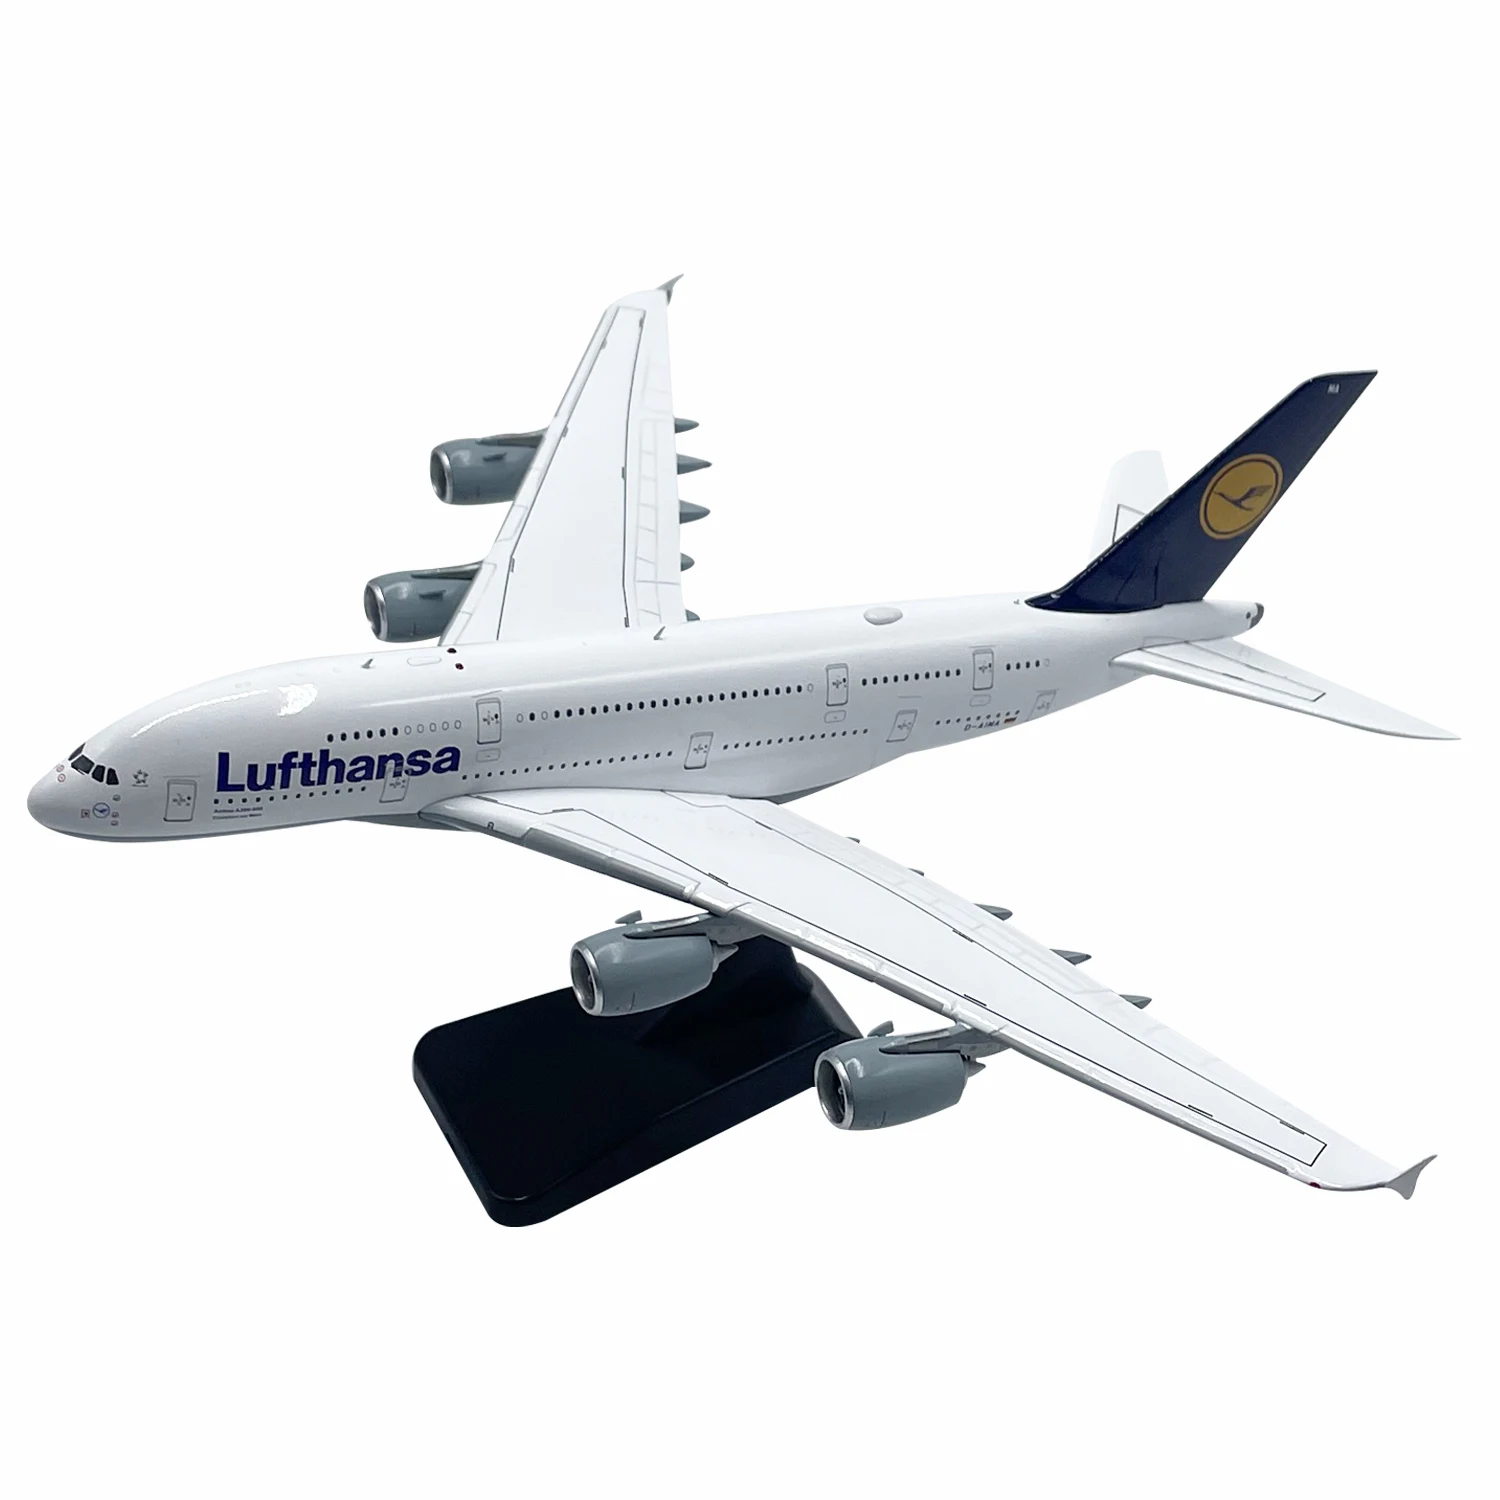 

1:400 Scale Lufthansa Airbus A380 D-AIMA Alloy Die-cast Passenger Aircraft Plane Model Collection Toy Gift